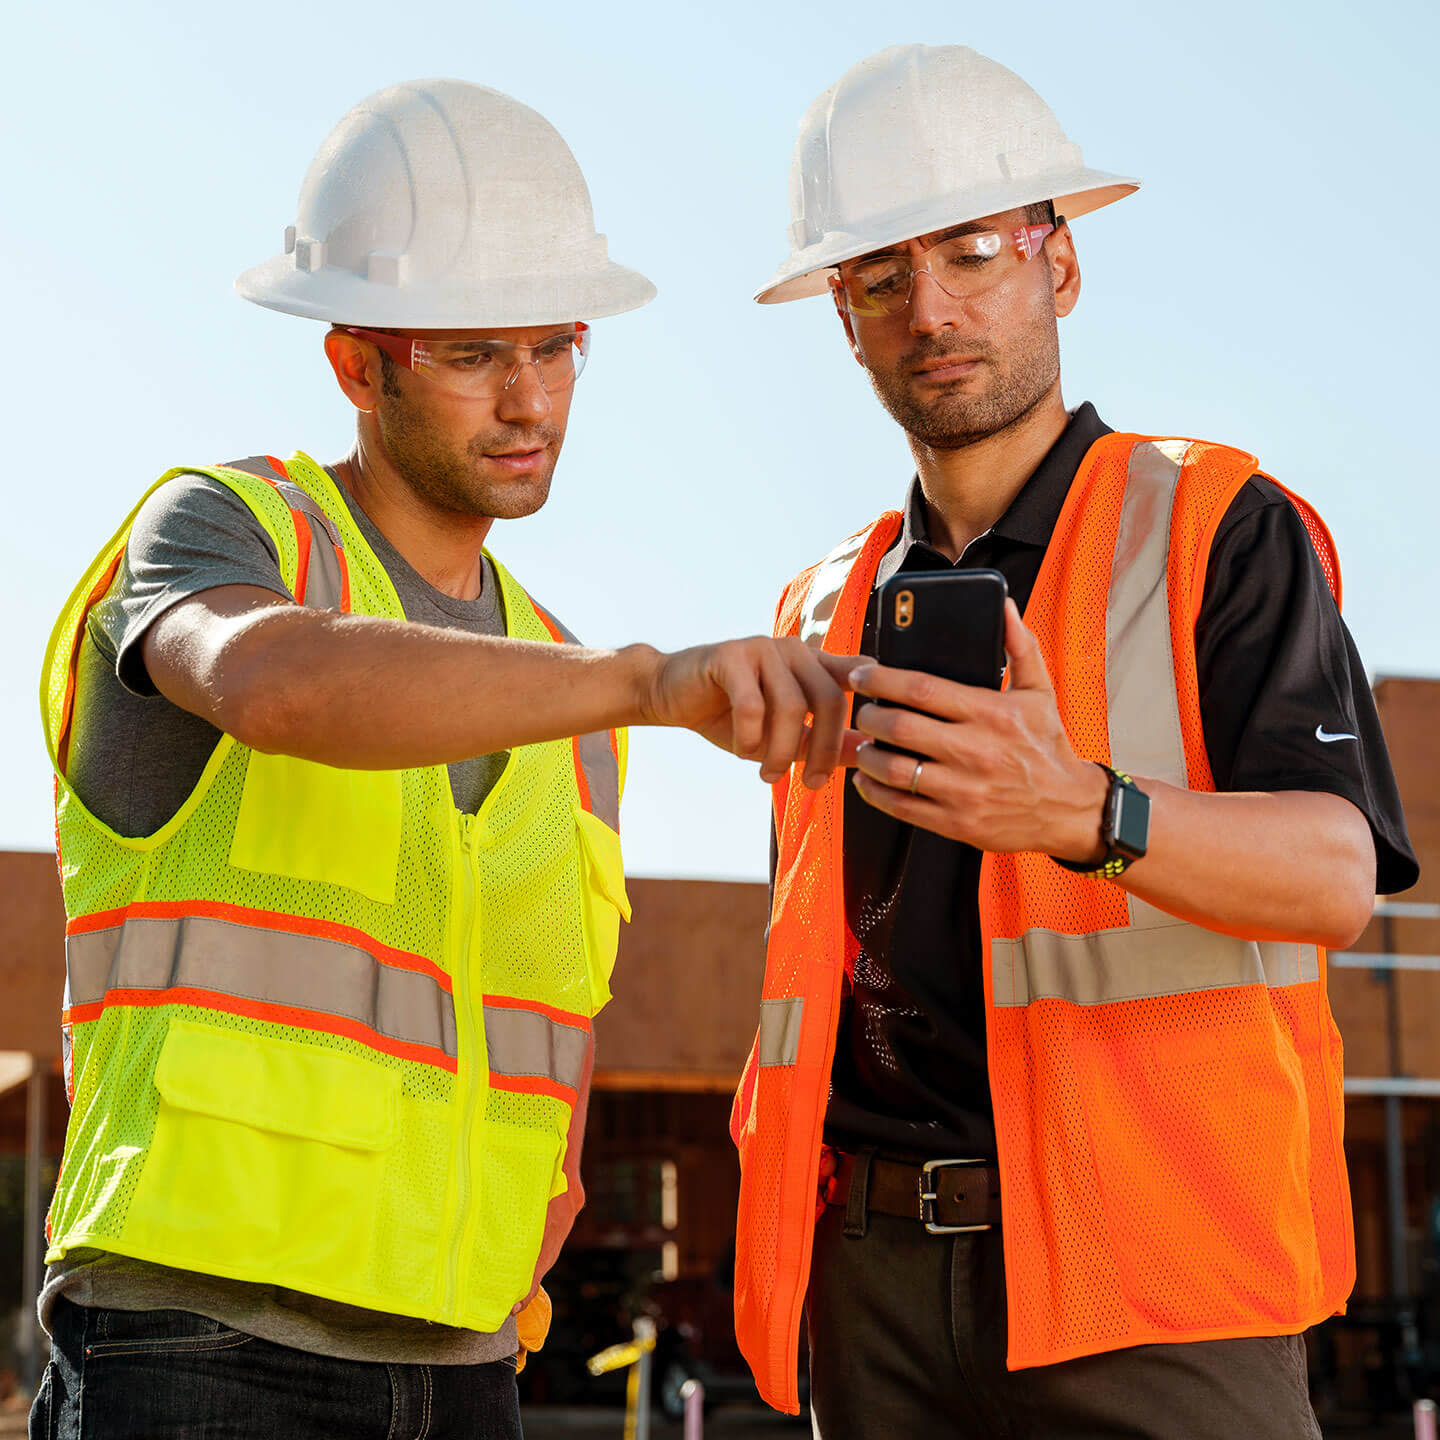 Construction workers looking at mobile device